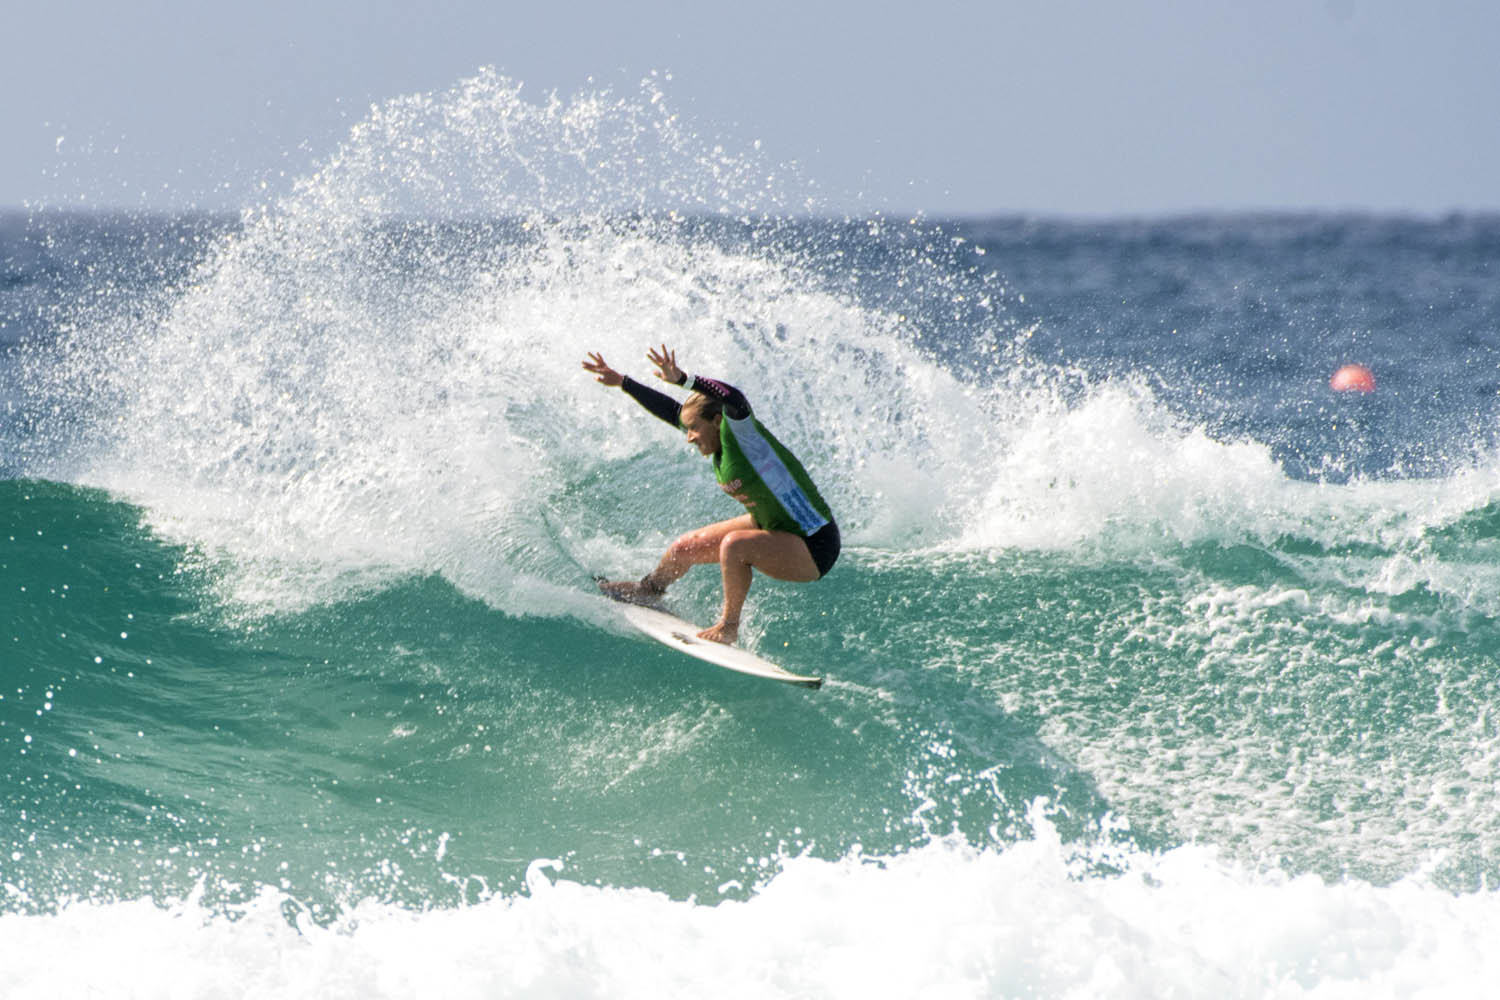 India Robinson at the Hydralyte Sports Pro Junior Gold Coast